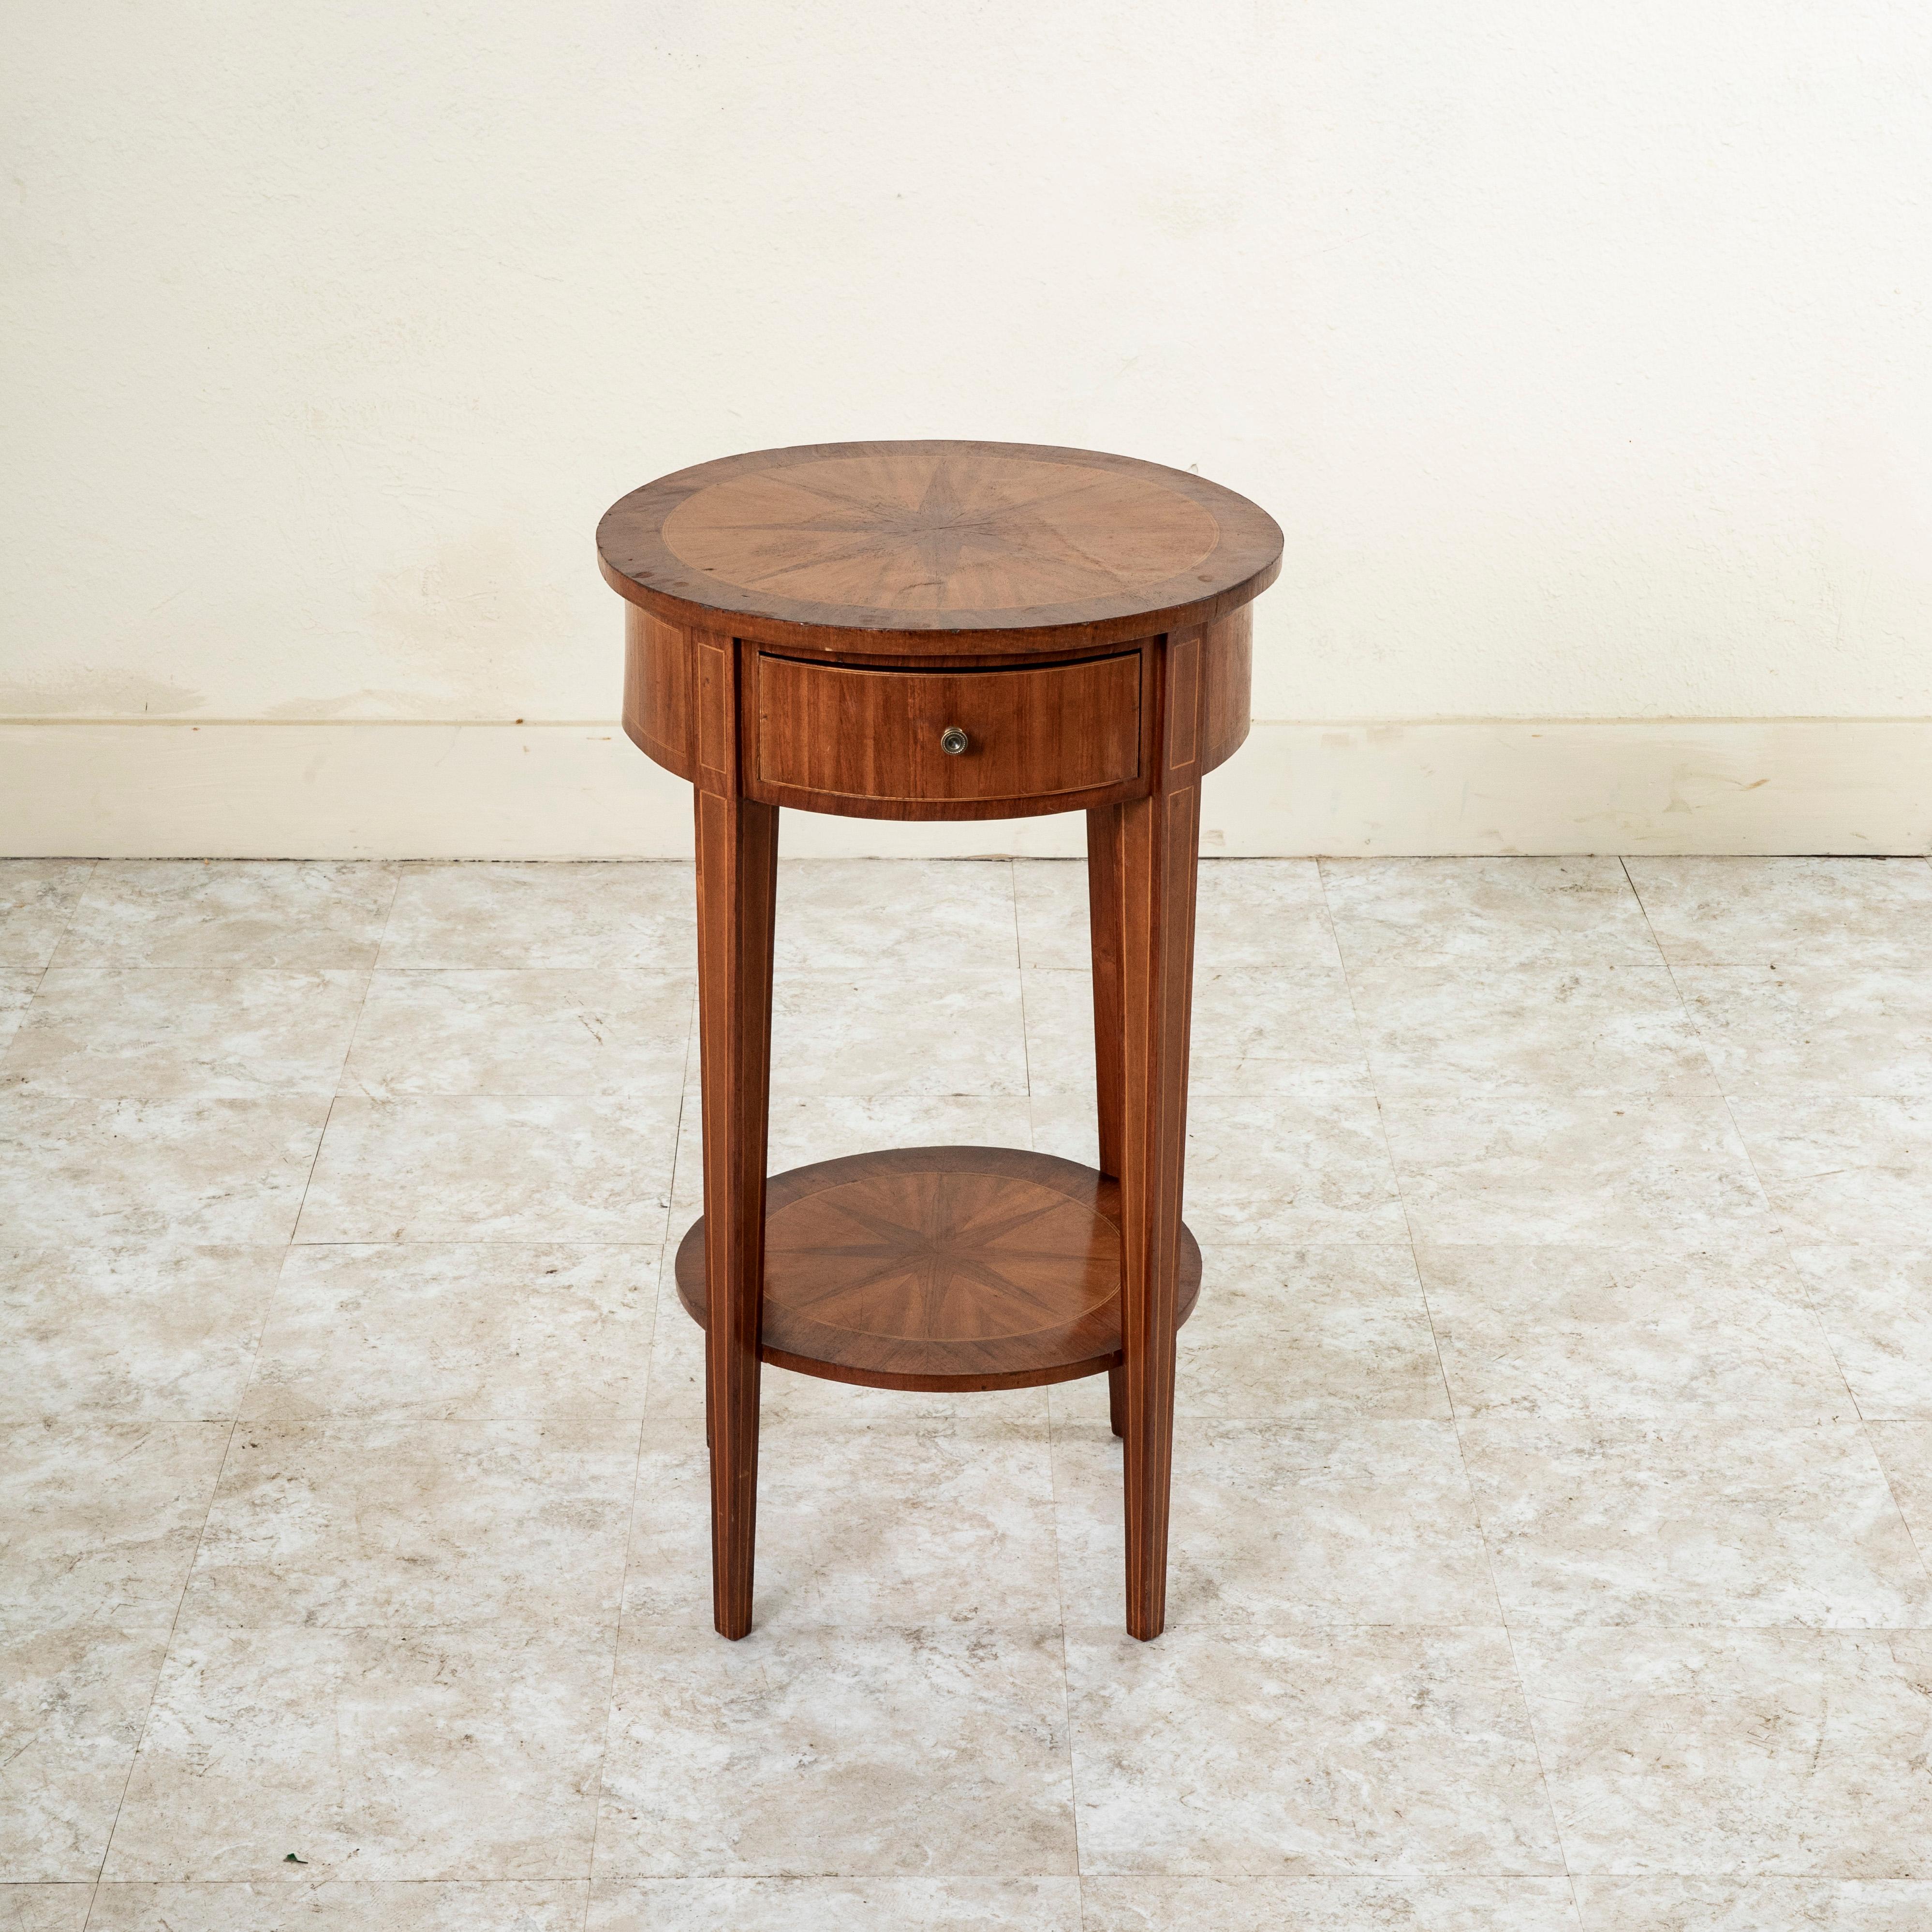 This early twentieth century French Louis XVI style rosewood side table features an inlaid eight pointed rosewood star in a circle of walnut surrounded by a fine border of lemonwood on the top. The table rests on four tapered square legs with an